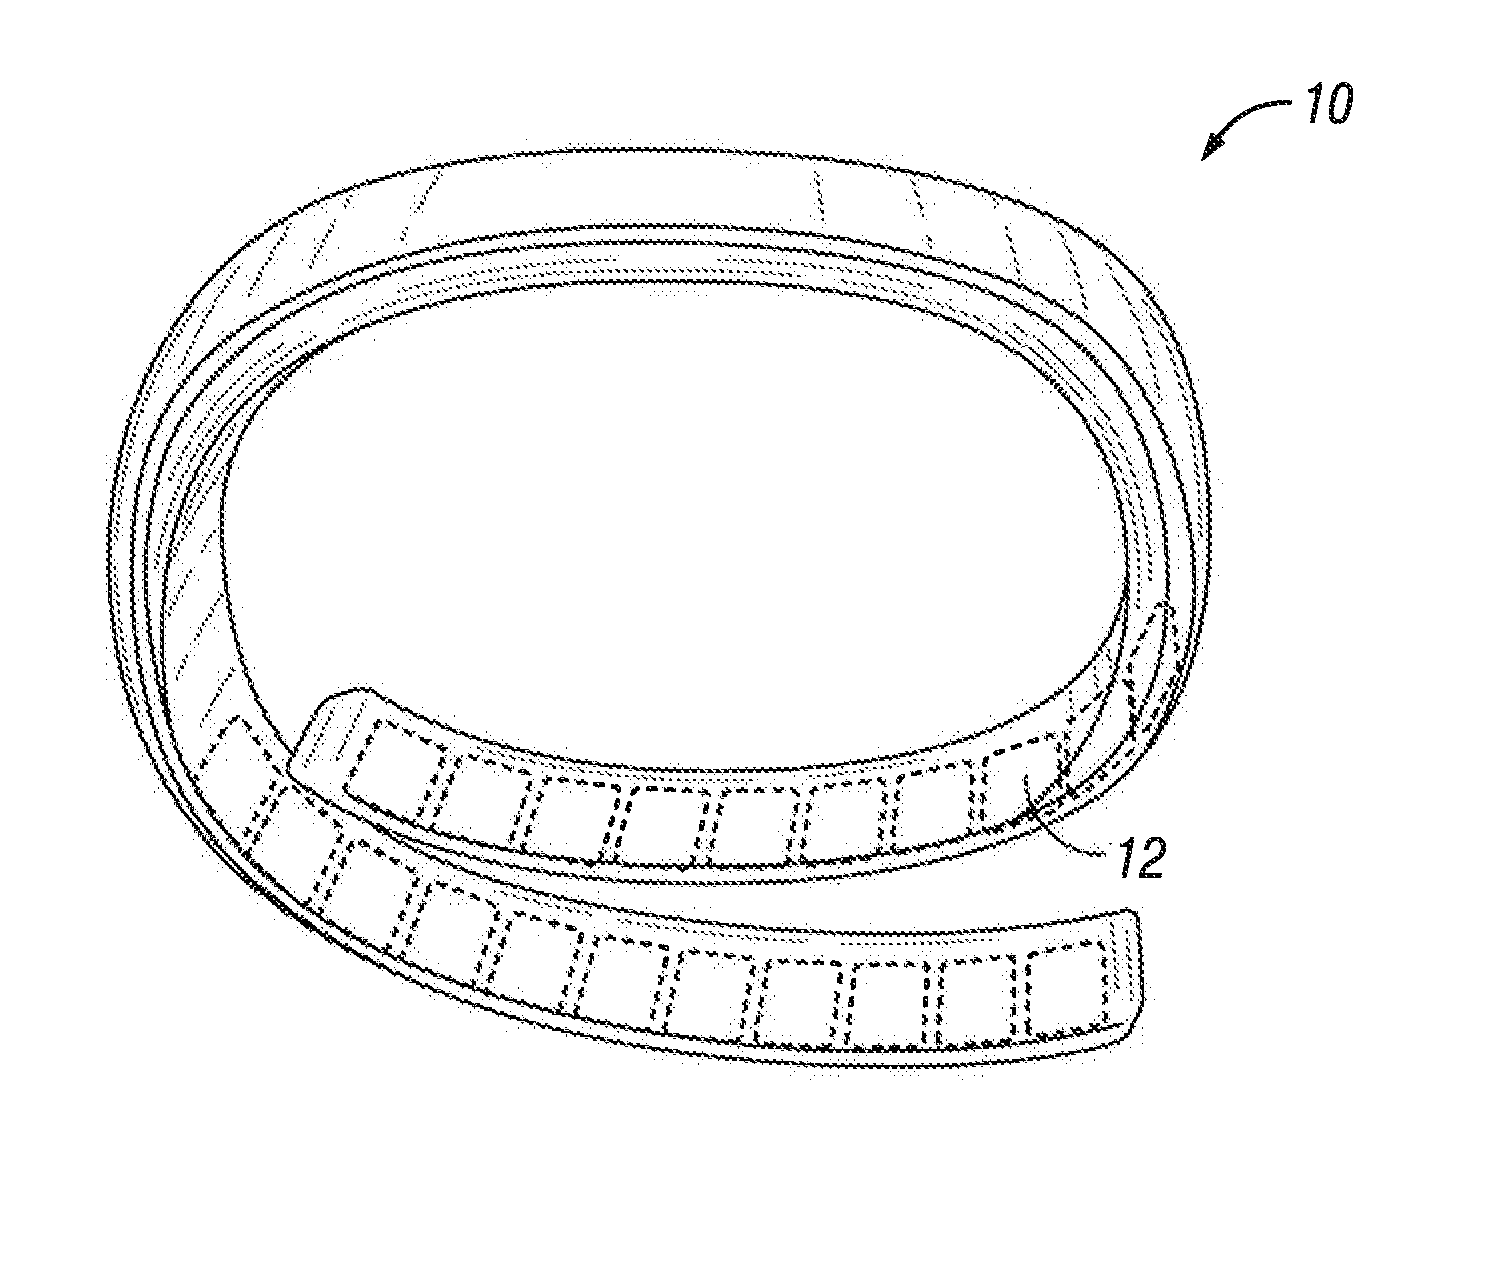 Telemetry system with tracking receiver devices